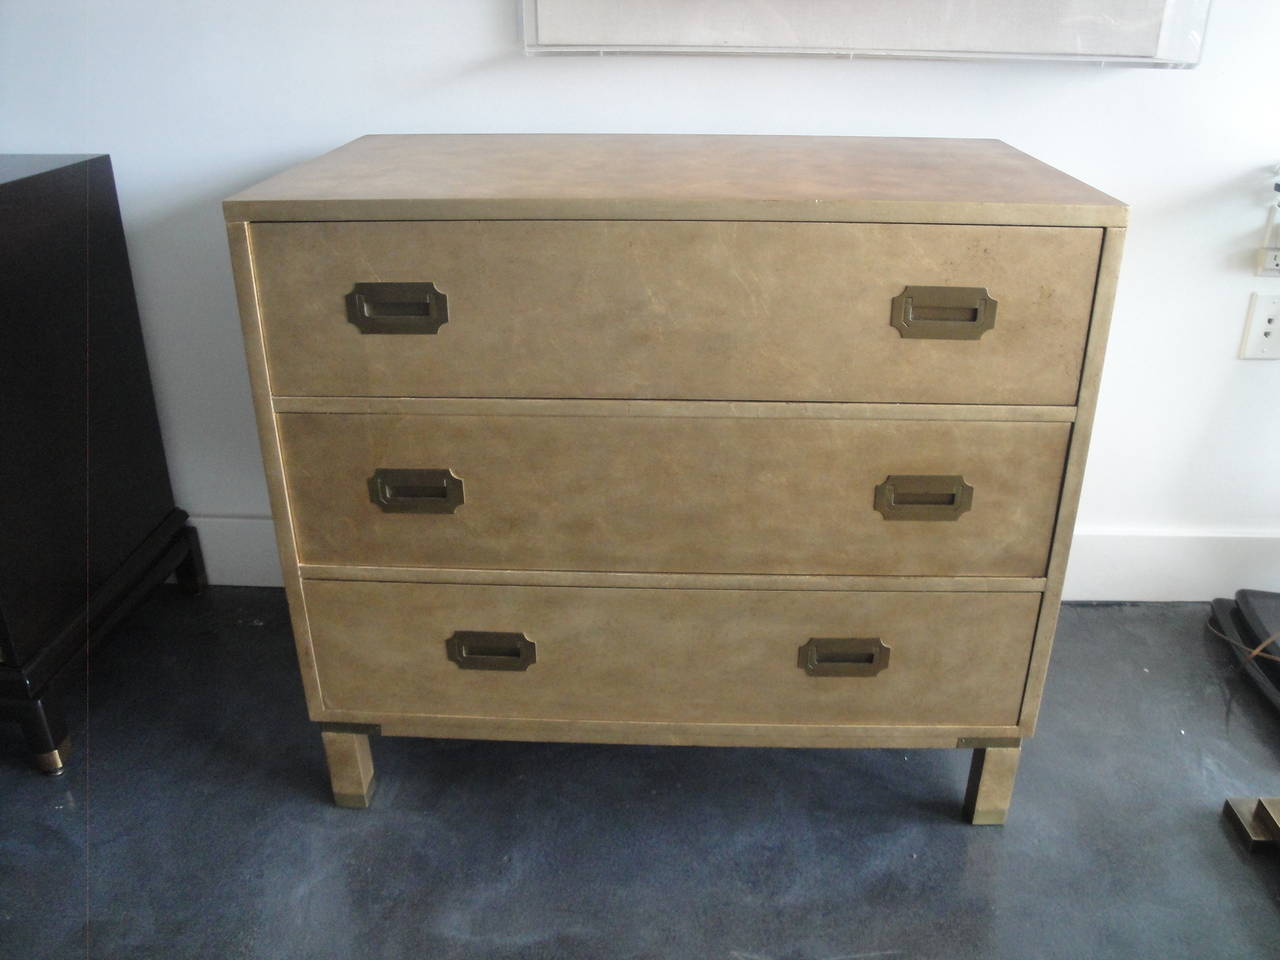 Campaign style gold leafed chest of drawers by Baker Furniture Company.